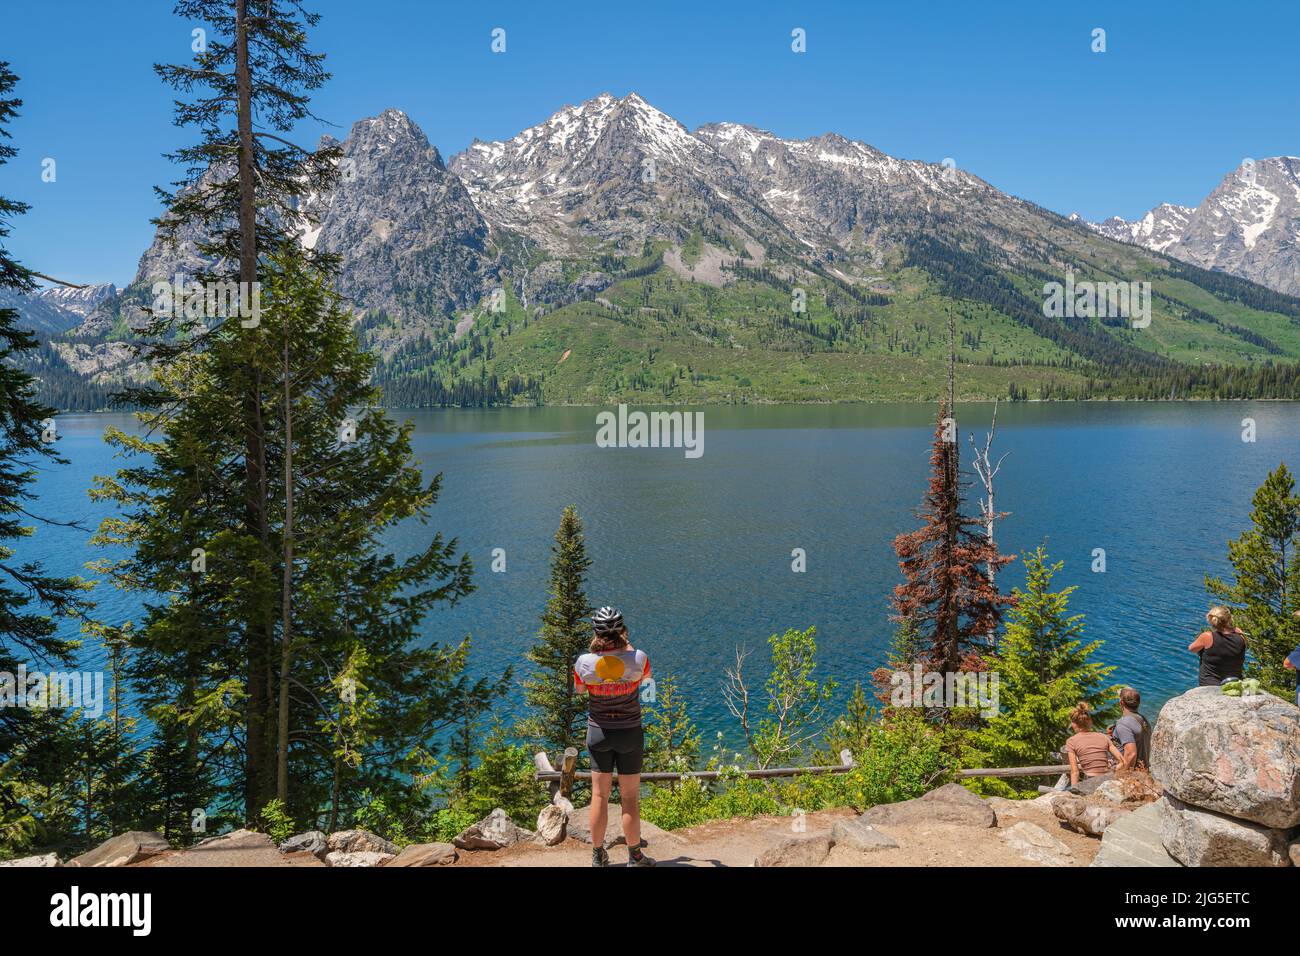 People admiring the beauty of the landscape in the Teton National park Wyoming state. Stock Photo